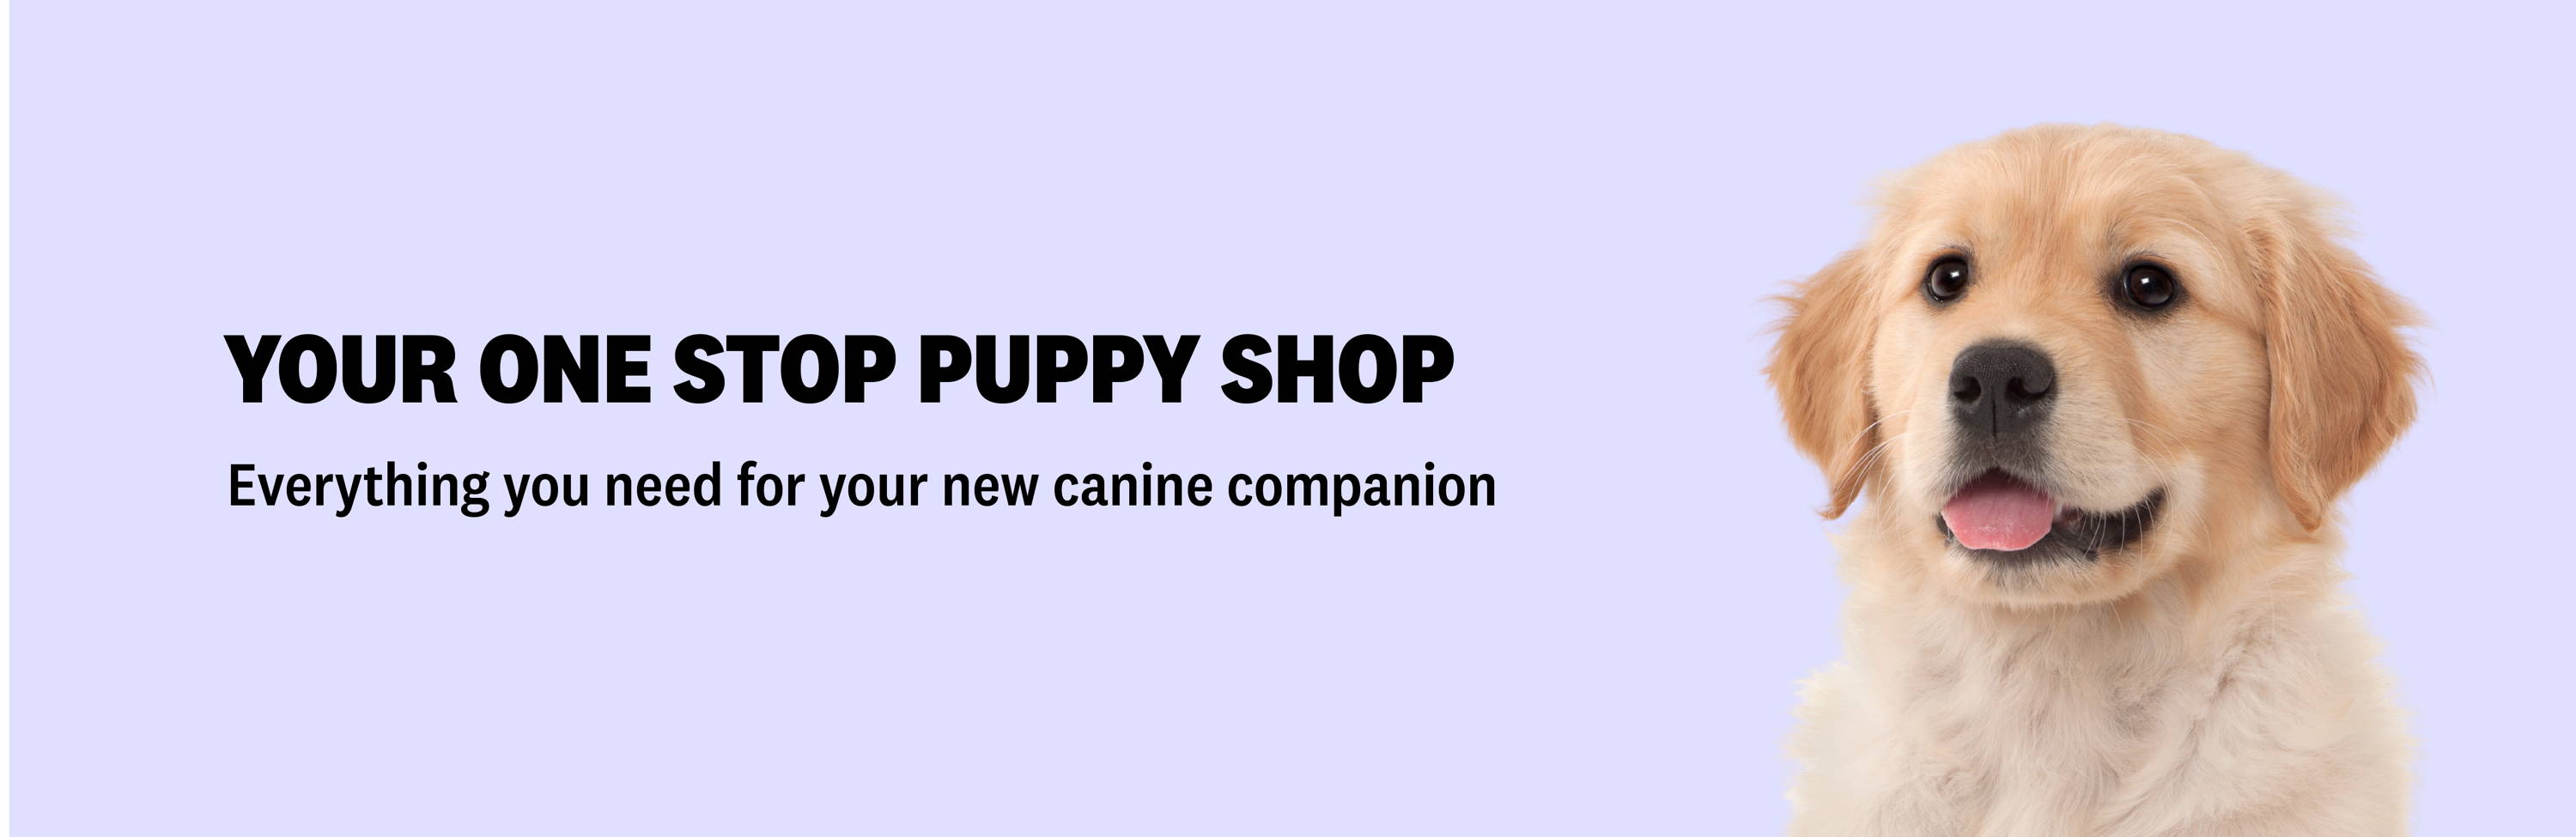 Your One Stop Puppy Shop